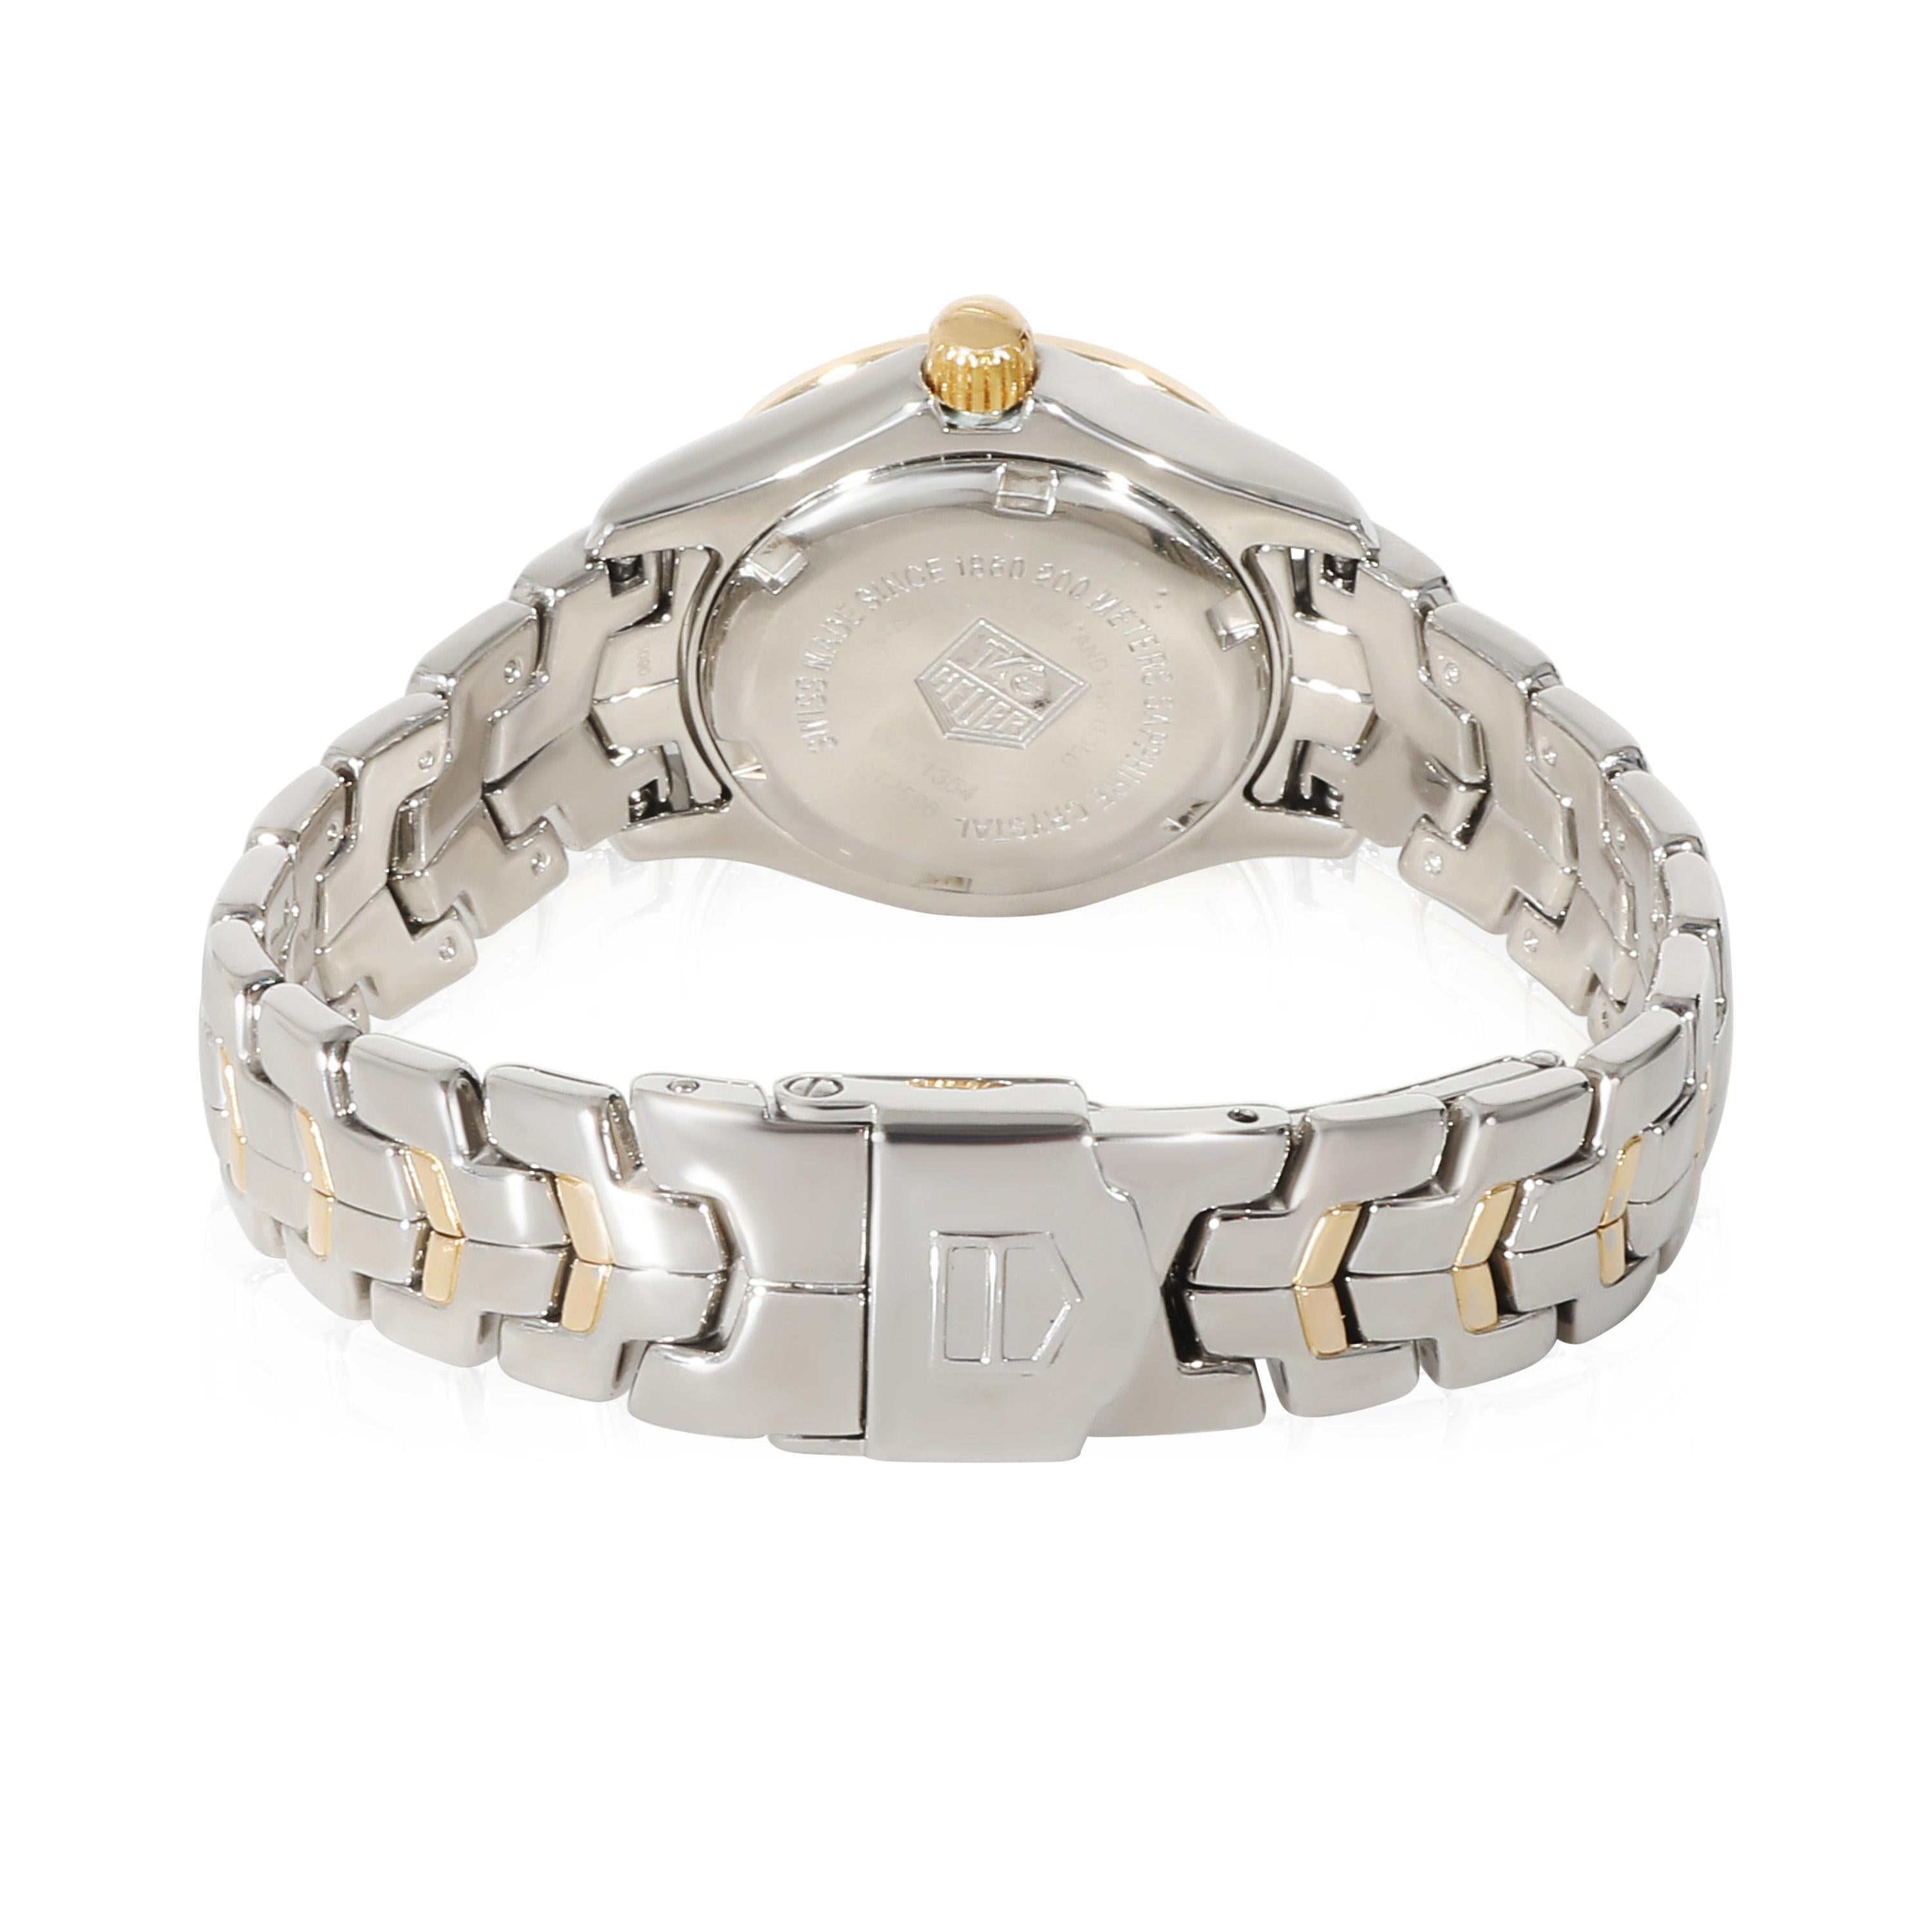 Tag Heuer Link WJF1354.BB0581 Women's Watch in 18kt Stainless Steel/Yellow Gold

SKU: 124841

PRIMARY DETAILS
Brand: Tag Heuer
Model: Link
Country of Origin: Switzerland
Movement Type: Quartz: Battery
Year of Manufacture: 2000-2009
Condition: Retail